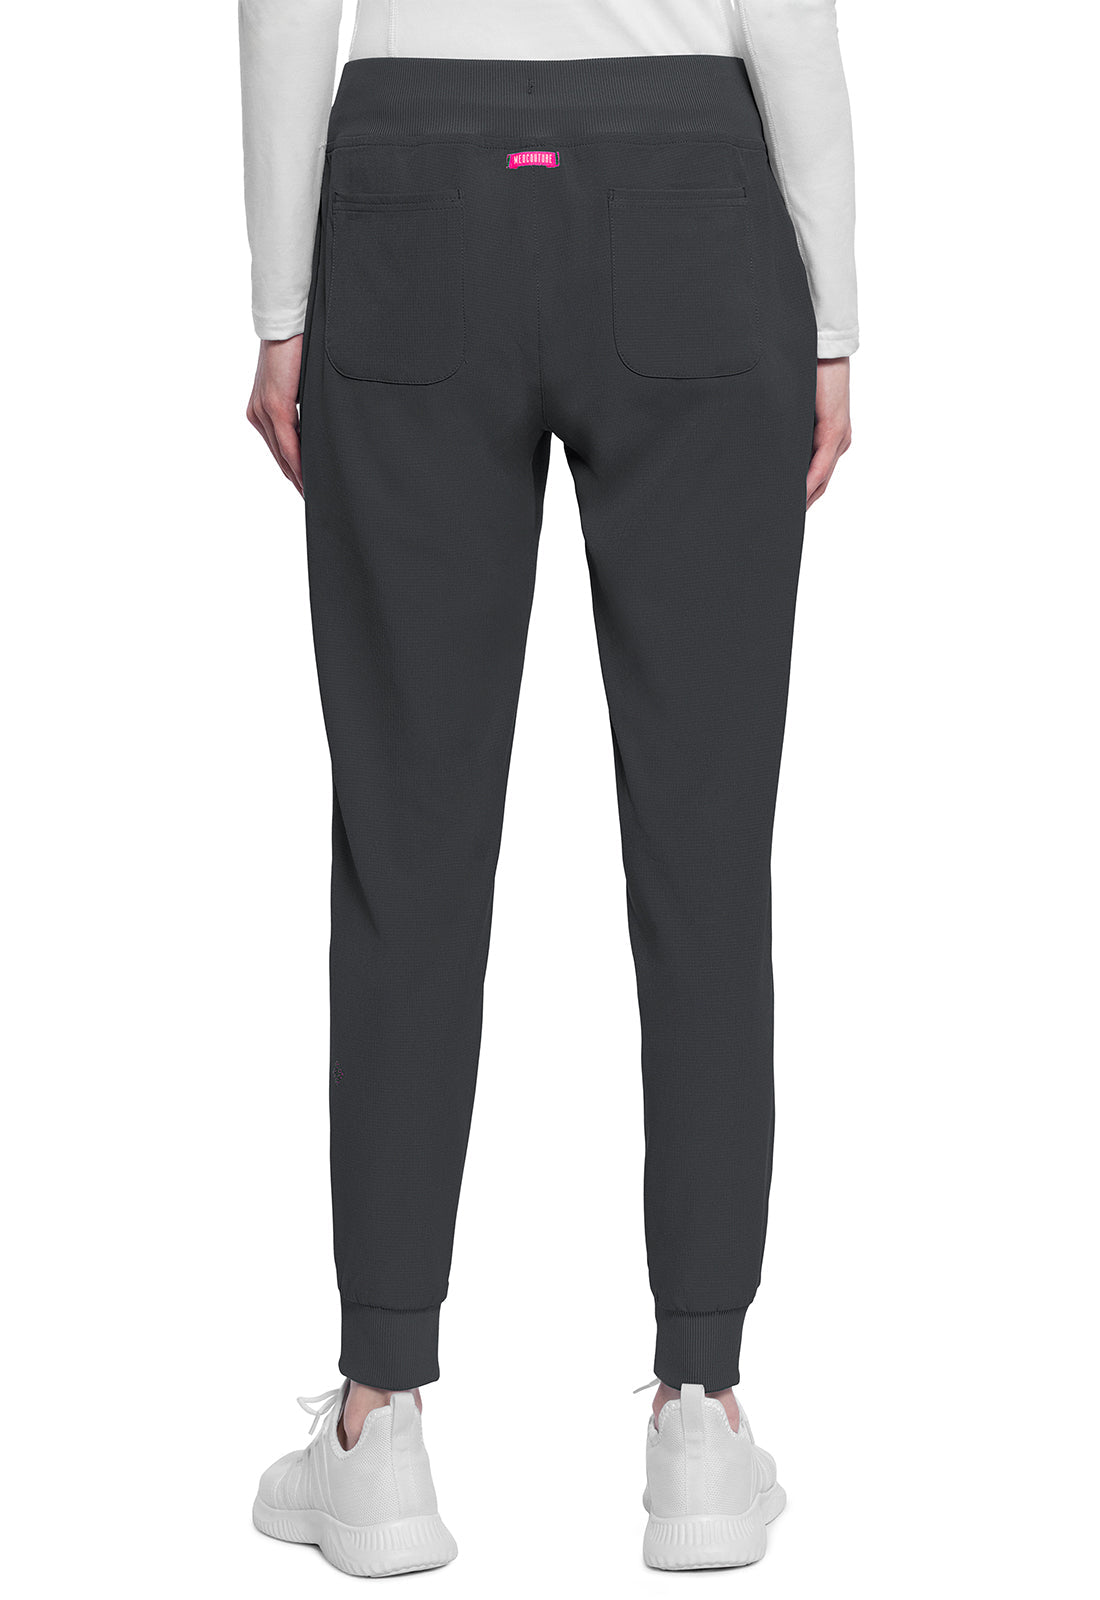 Med Couture AMP Jogger Scrub Pant MC102 in Black, Navy, Pewter, Royal - Scrubs Select